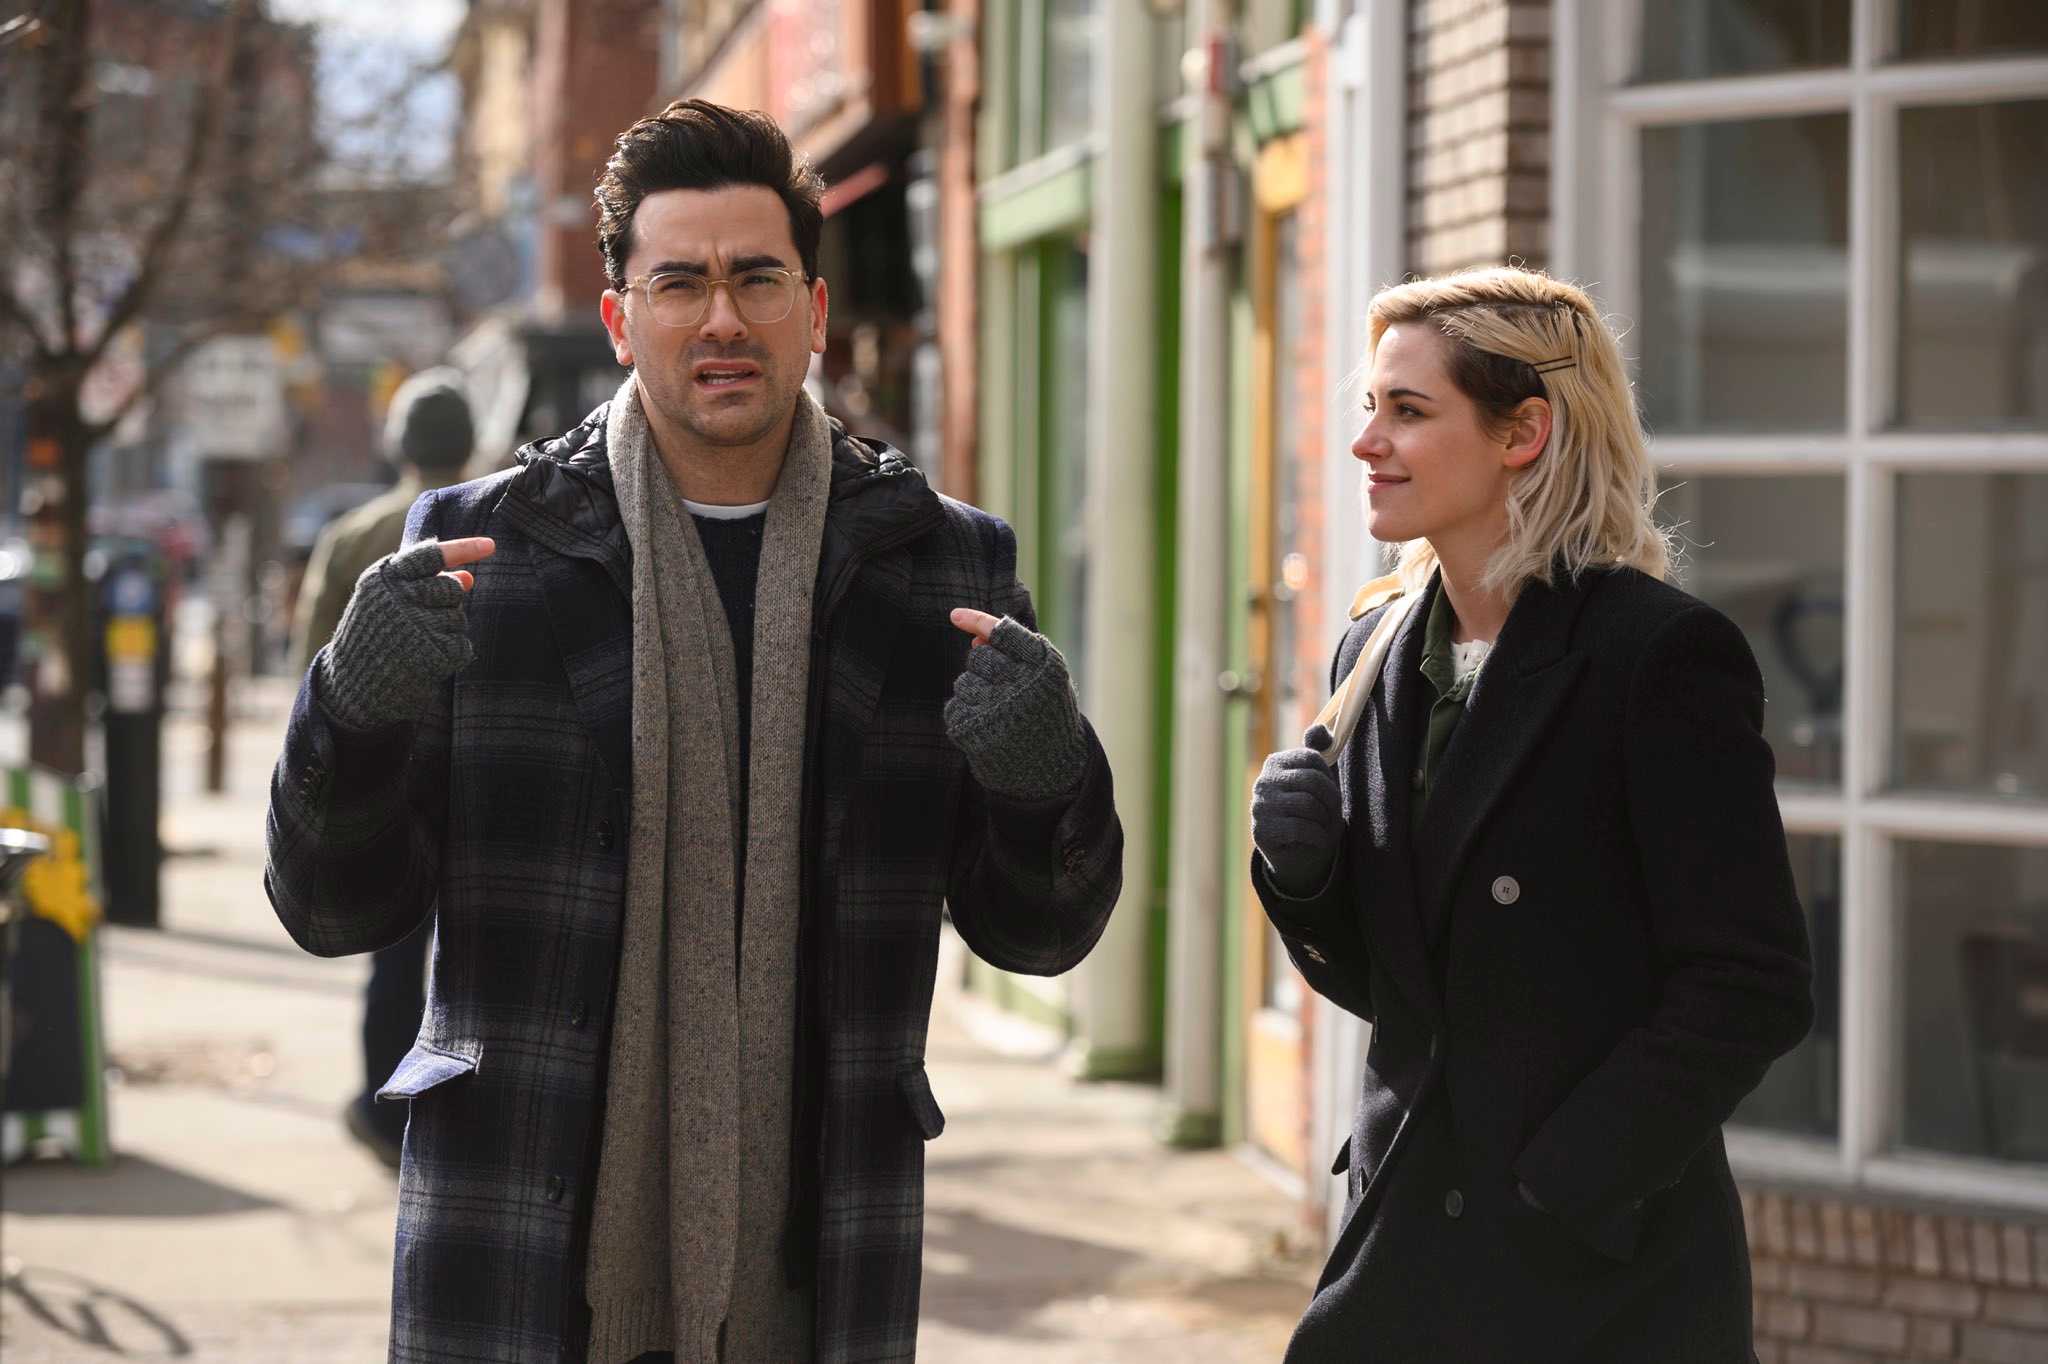 Like You, the “Happiest Season” Cast Is Also Obsessed With Dan Levy